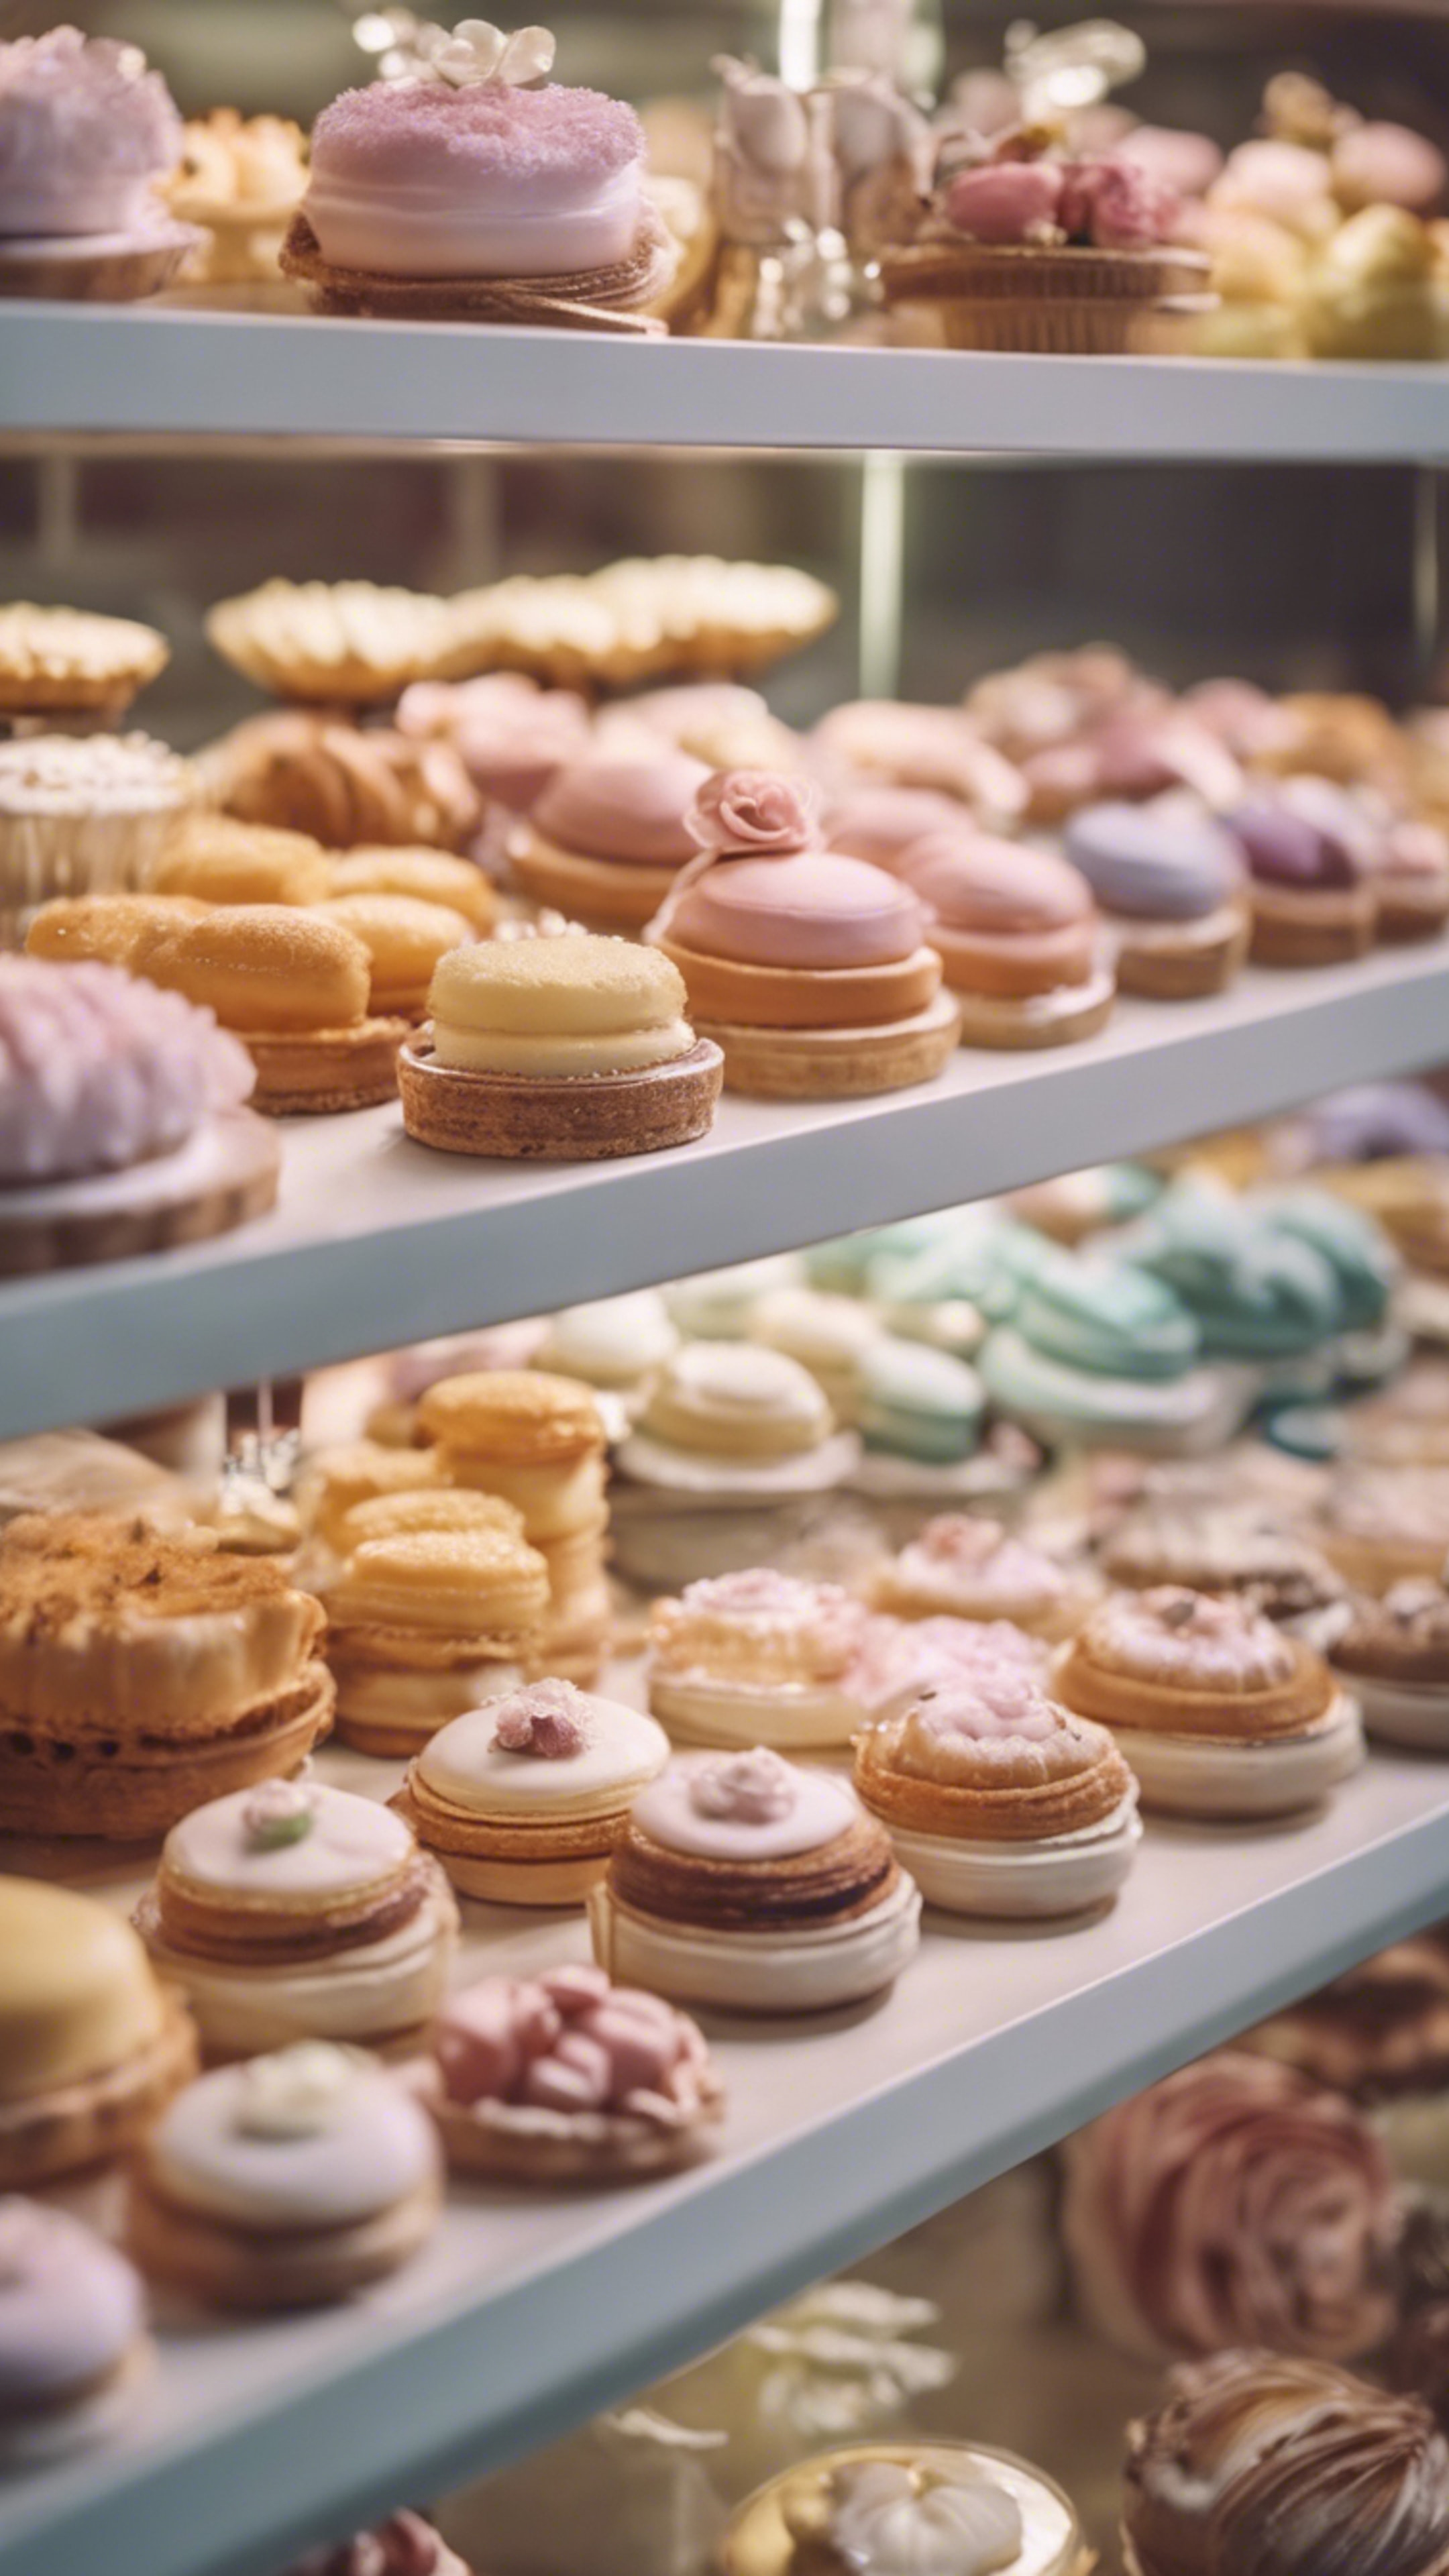 A classic French patisserie in pastel colors, filled with elegantly fashioned cakes and pastries. Валлпапер[85bb484f9d7f40c5ac29]